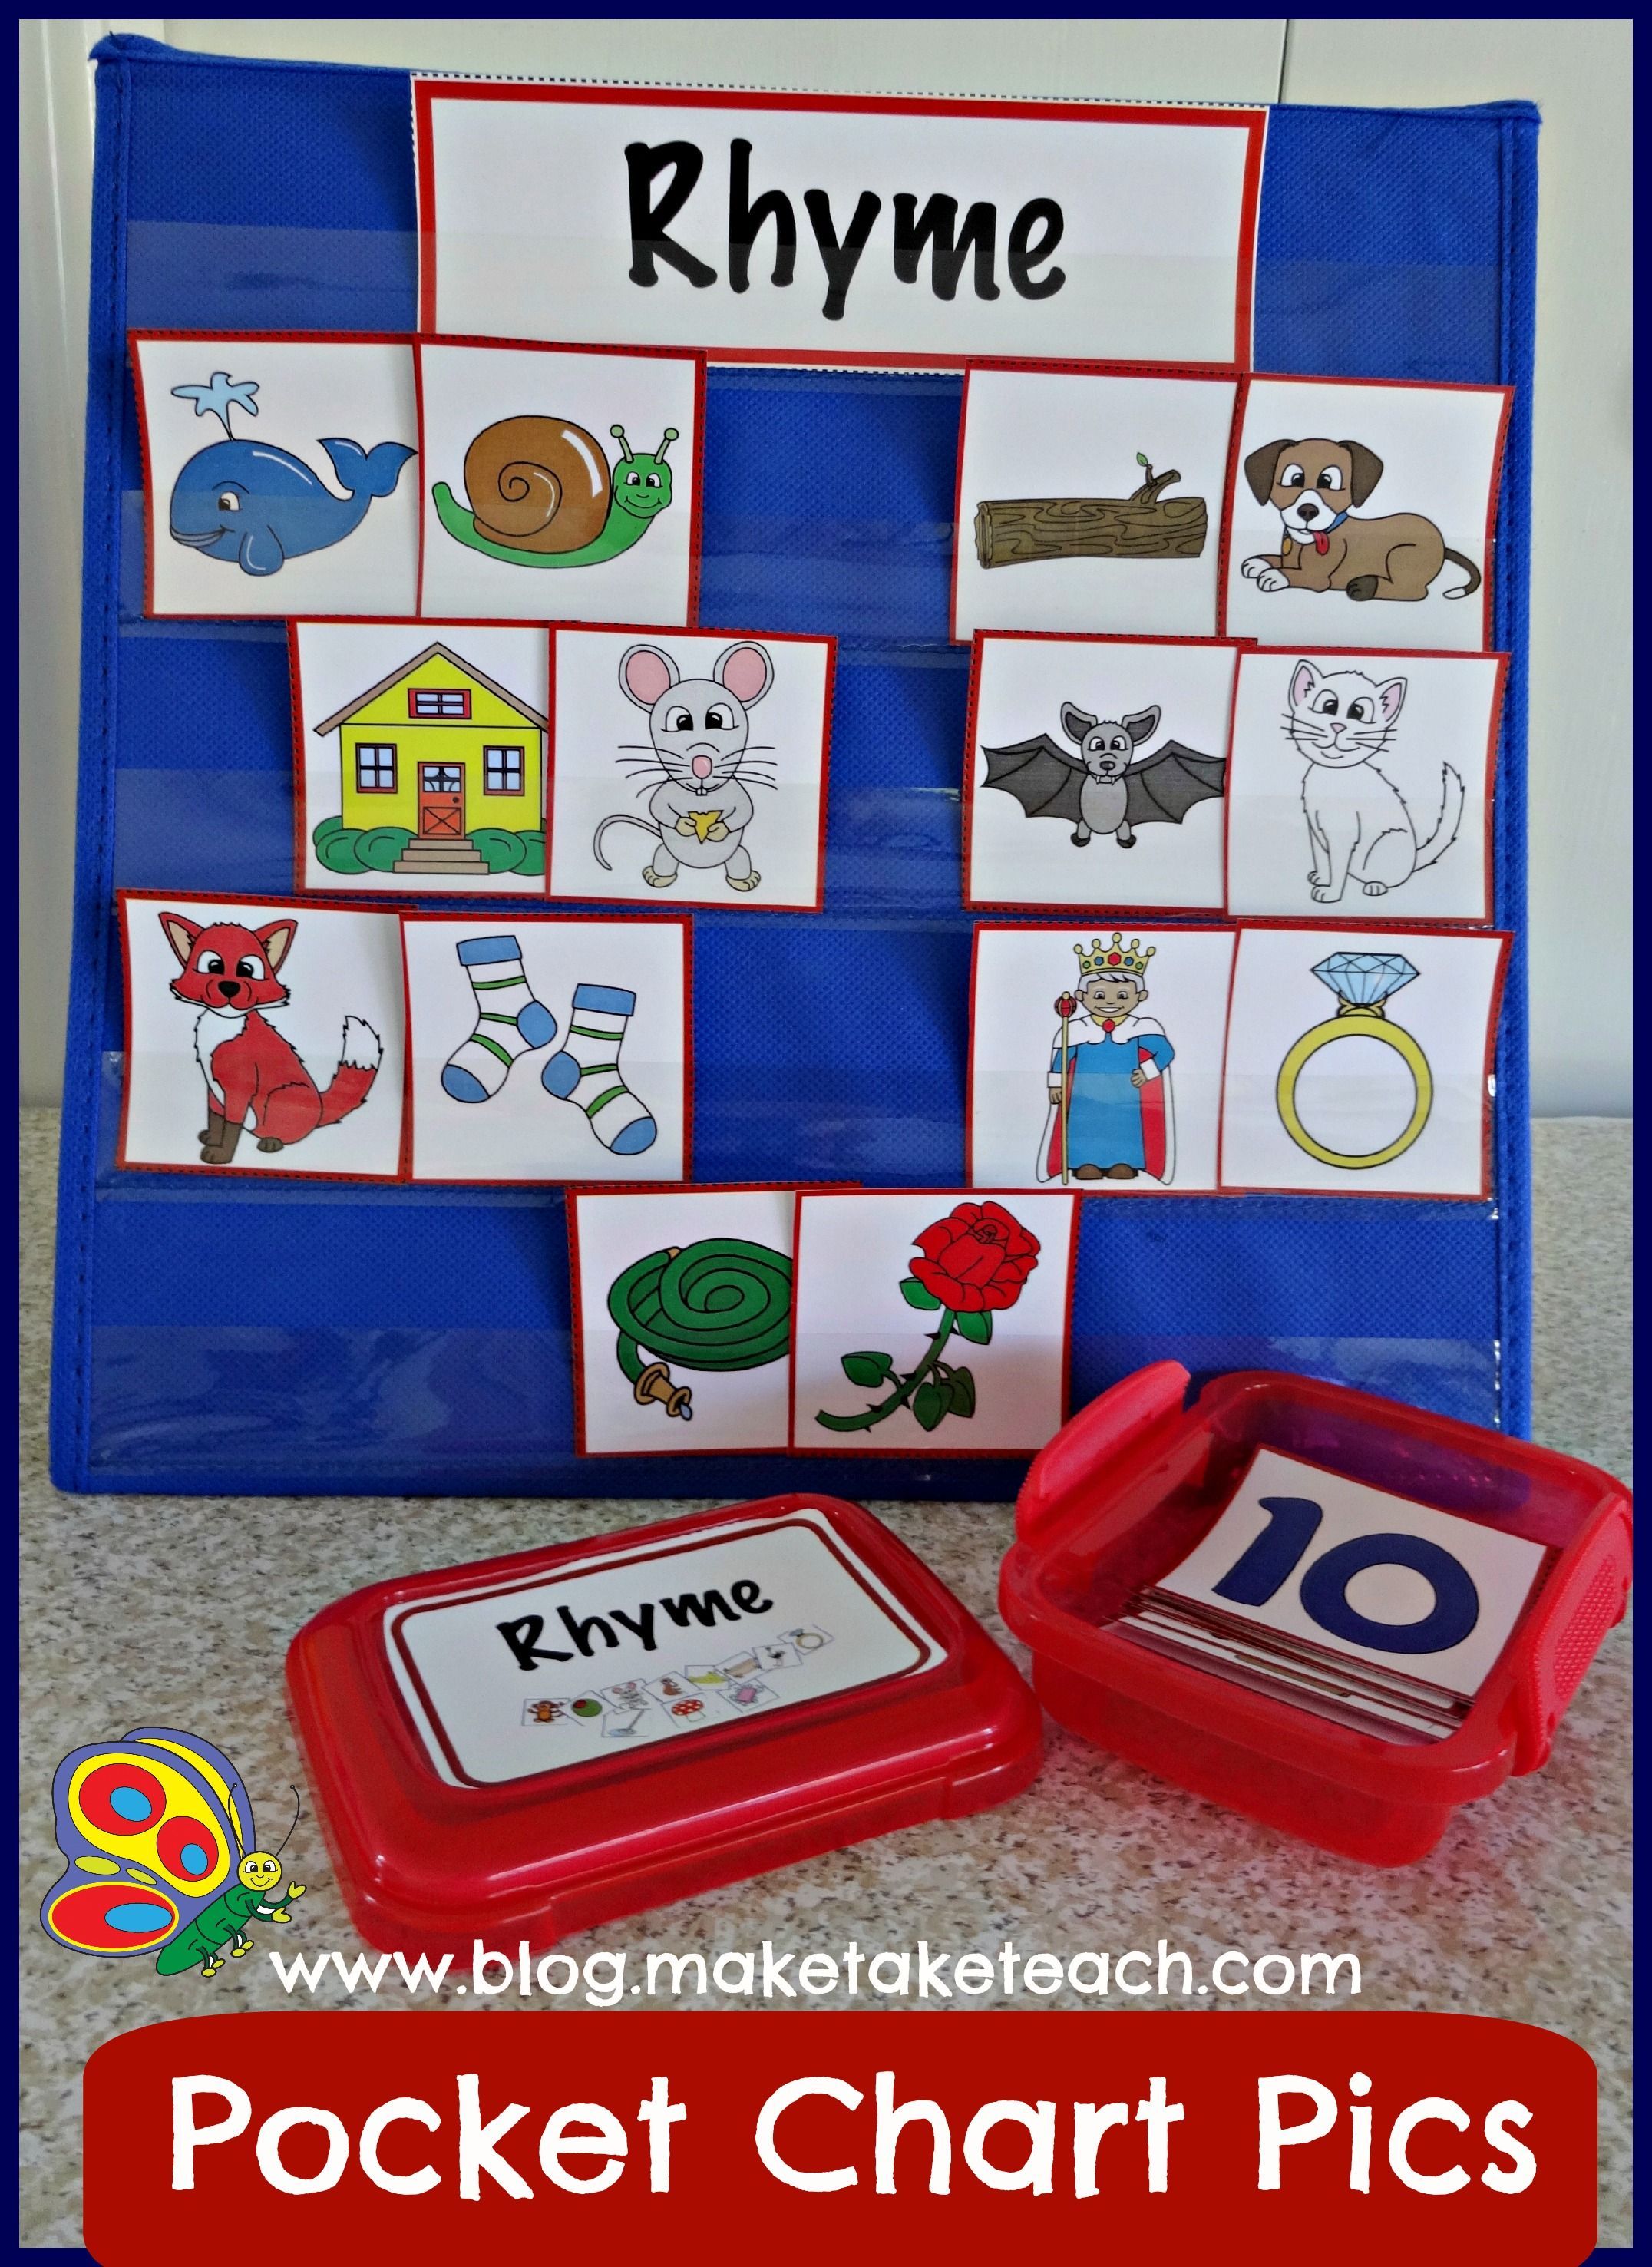 Pocket Chart Pictures.  Over 200 colorful pictures for teaching beginning sounds